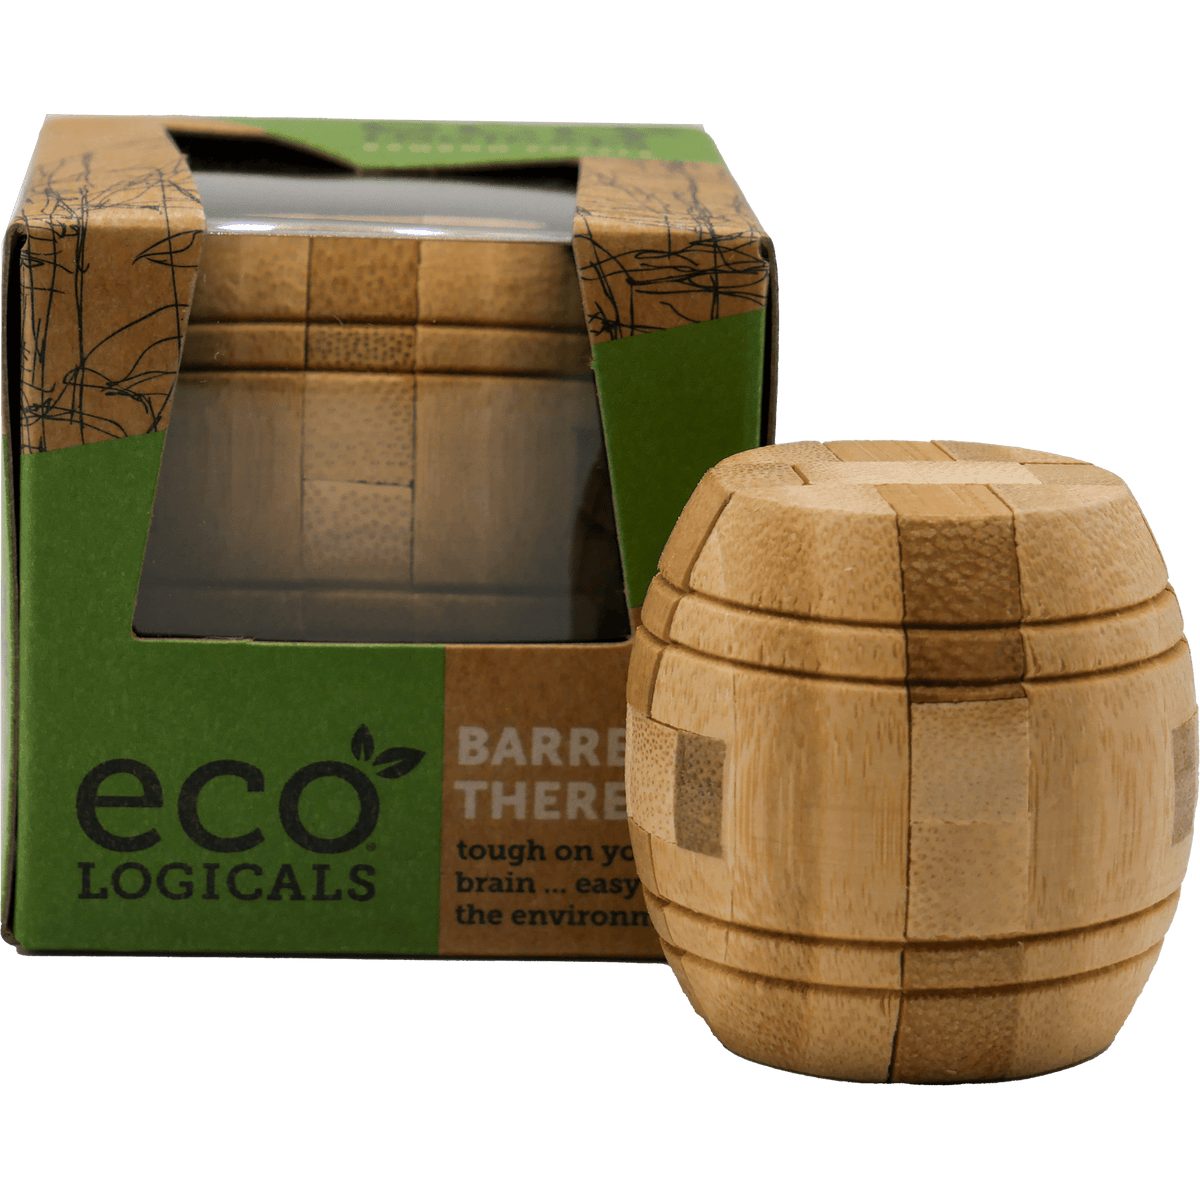 Eco Logicals: Barrely There